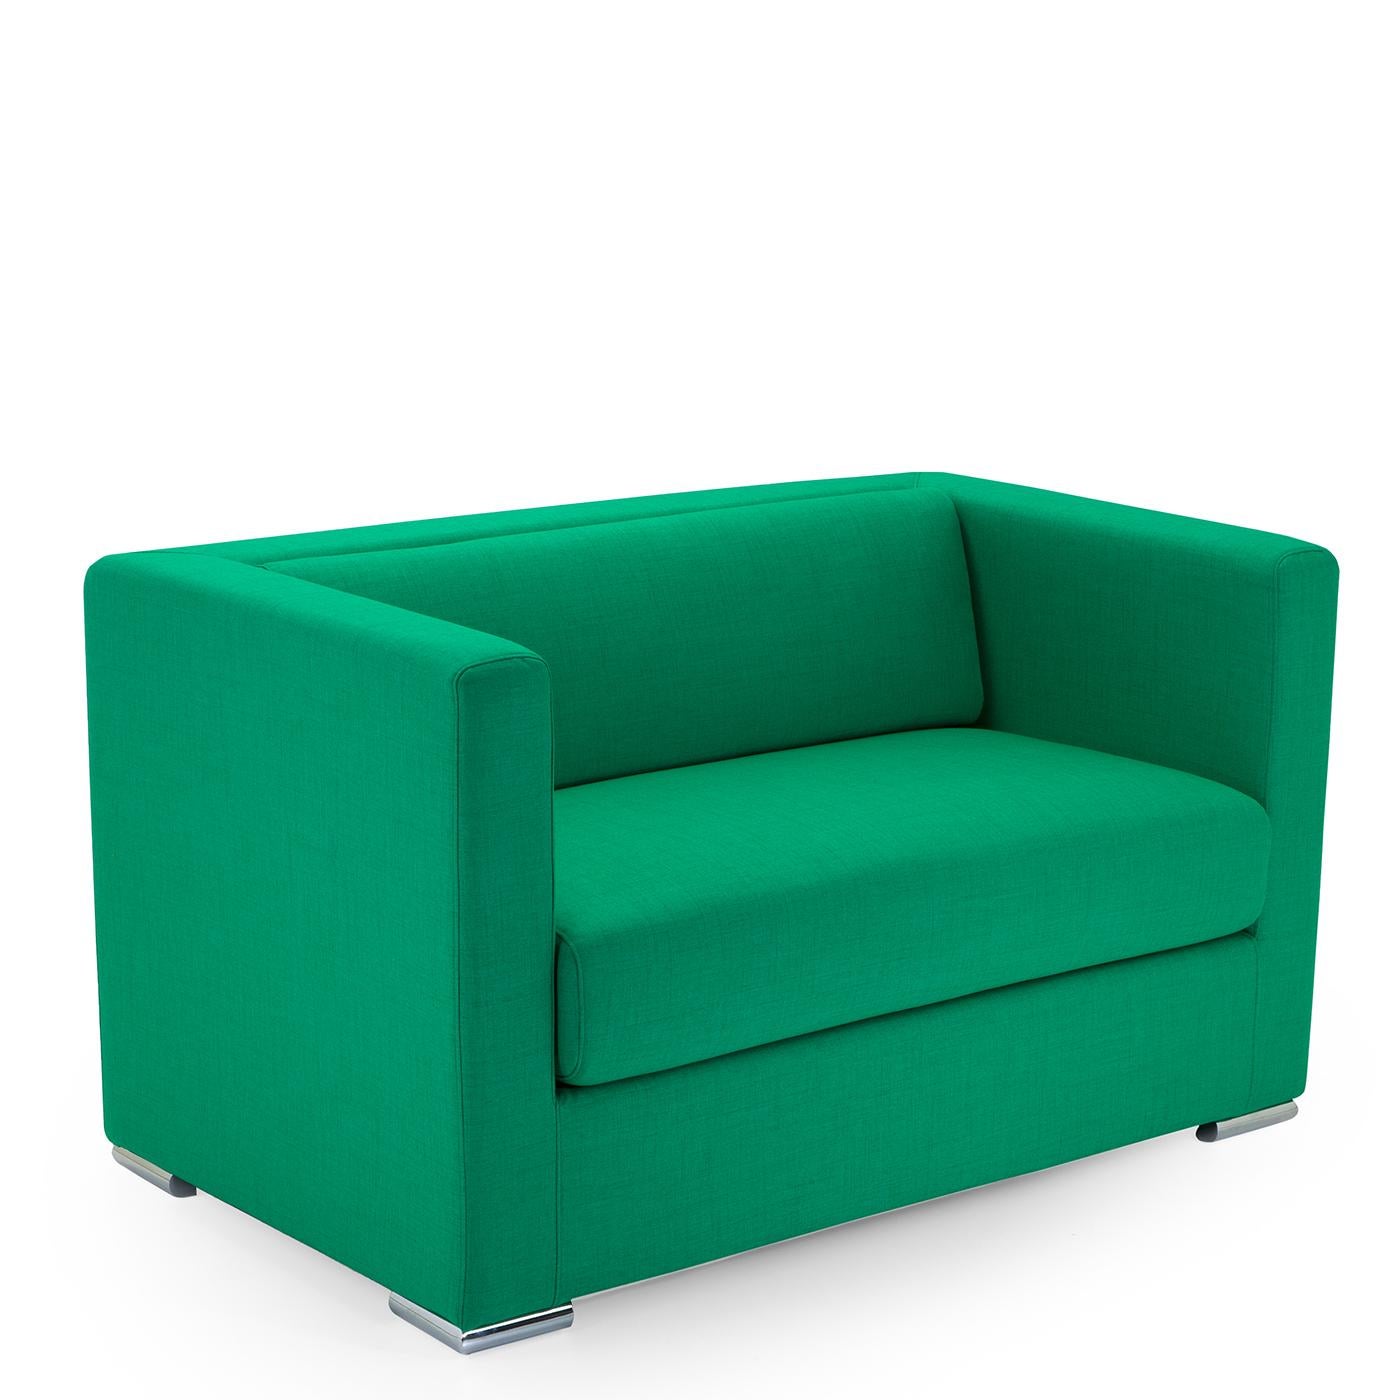 Embodying comfort and functionality, the well-defined rectangular shape and square armrest of this box-like sofa are covered in a stunning seafoam-colored Dacron. The plywood frame is entirely padded with multi-density, cold-injected polyurethane